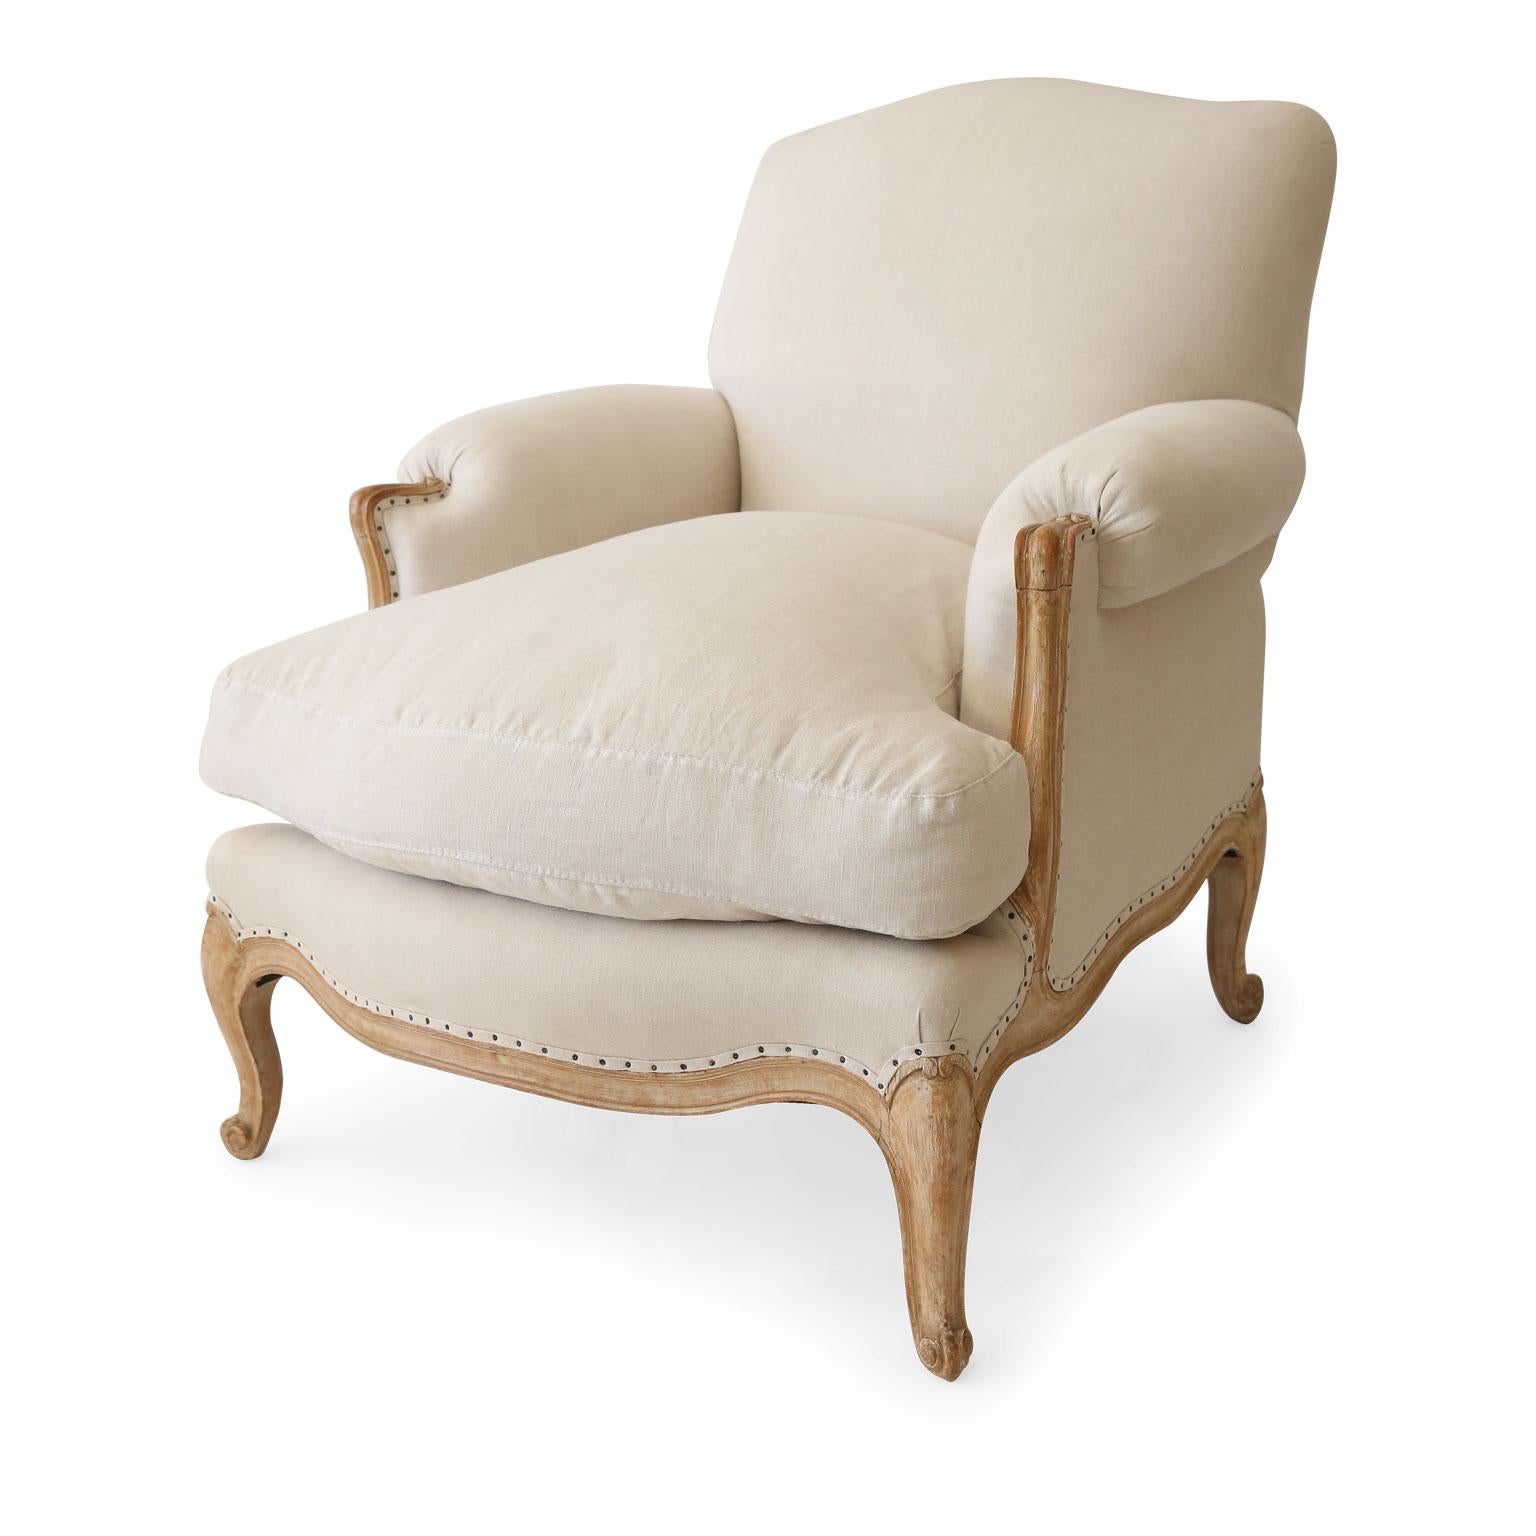 Voluptuous Louis XV bergeres: these generously proportioned early 20th century French armchairs are scraped back to their original cream color painted finish and newly-upholstered in a neutral linen.